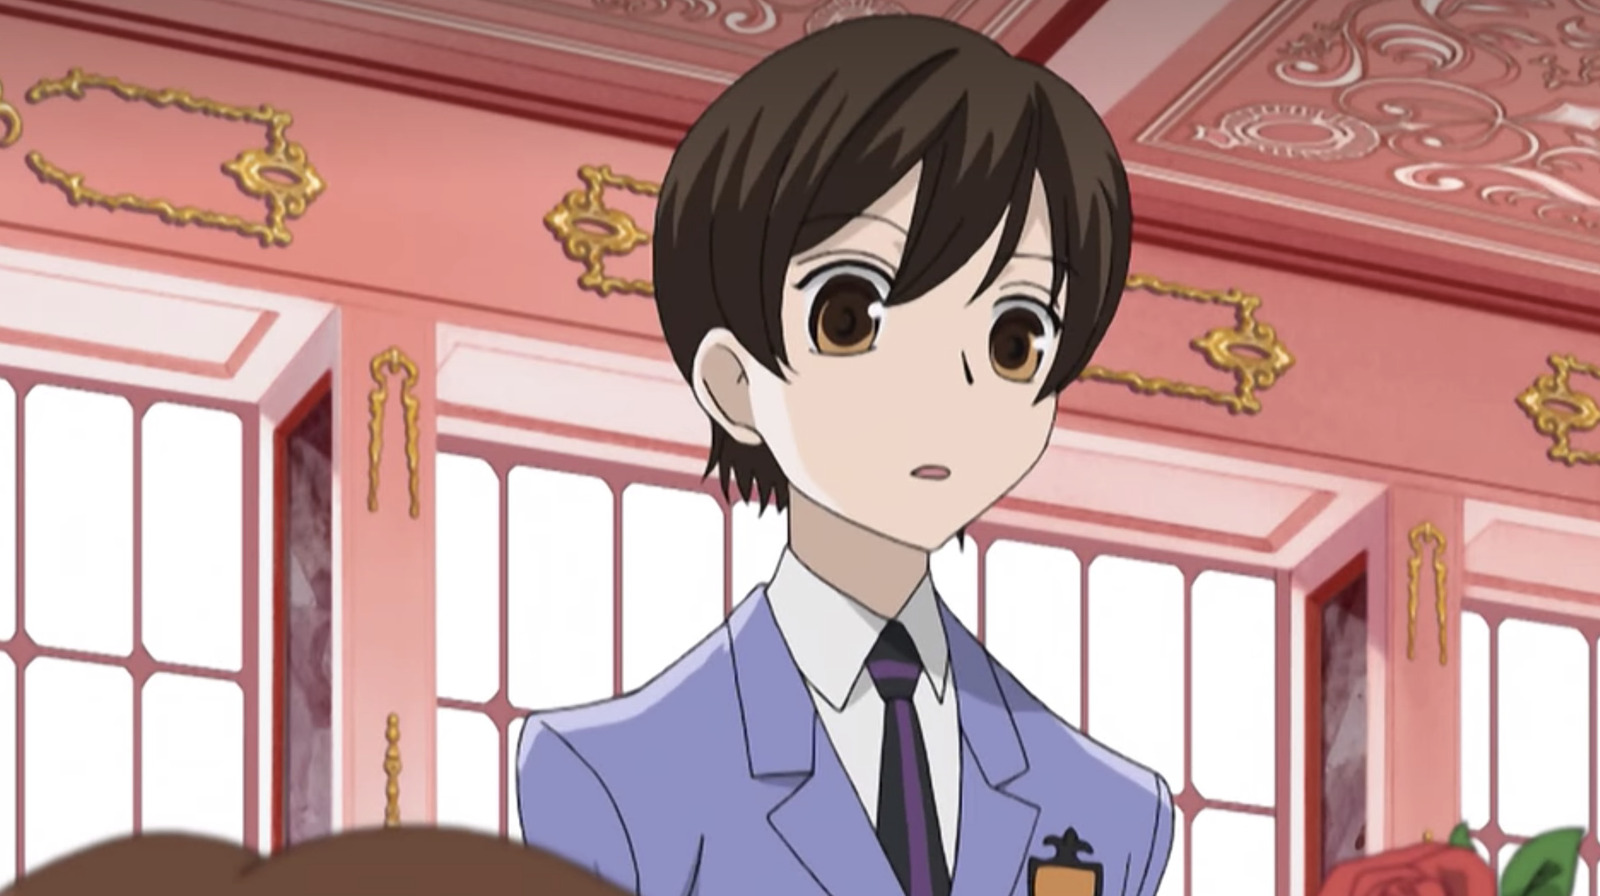 Ouran High School host club creator has some rules for writing Haruhi